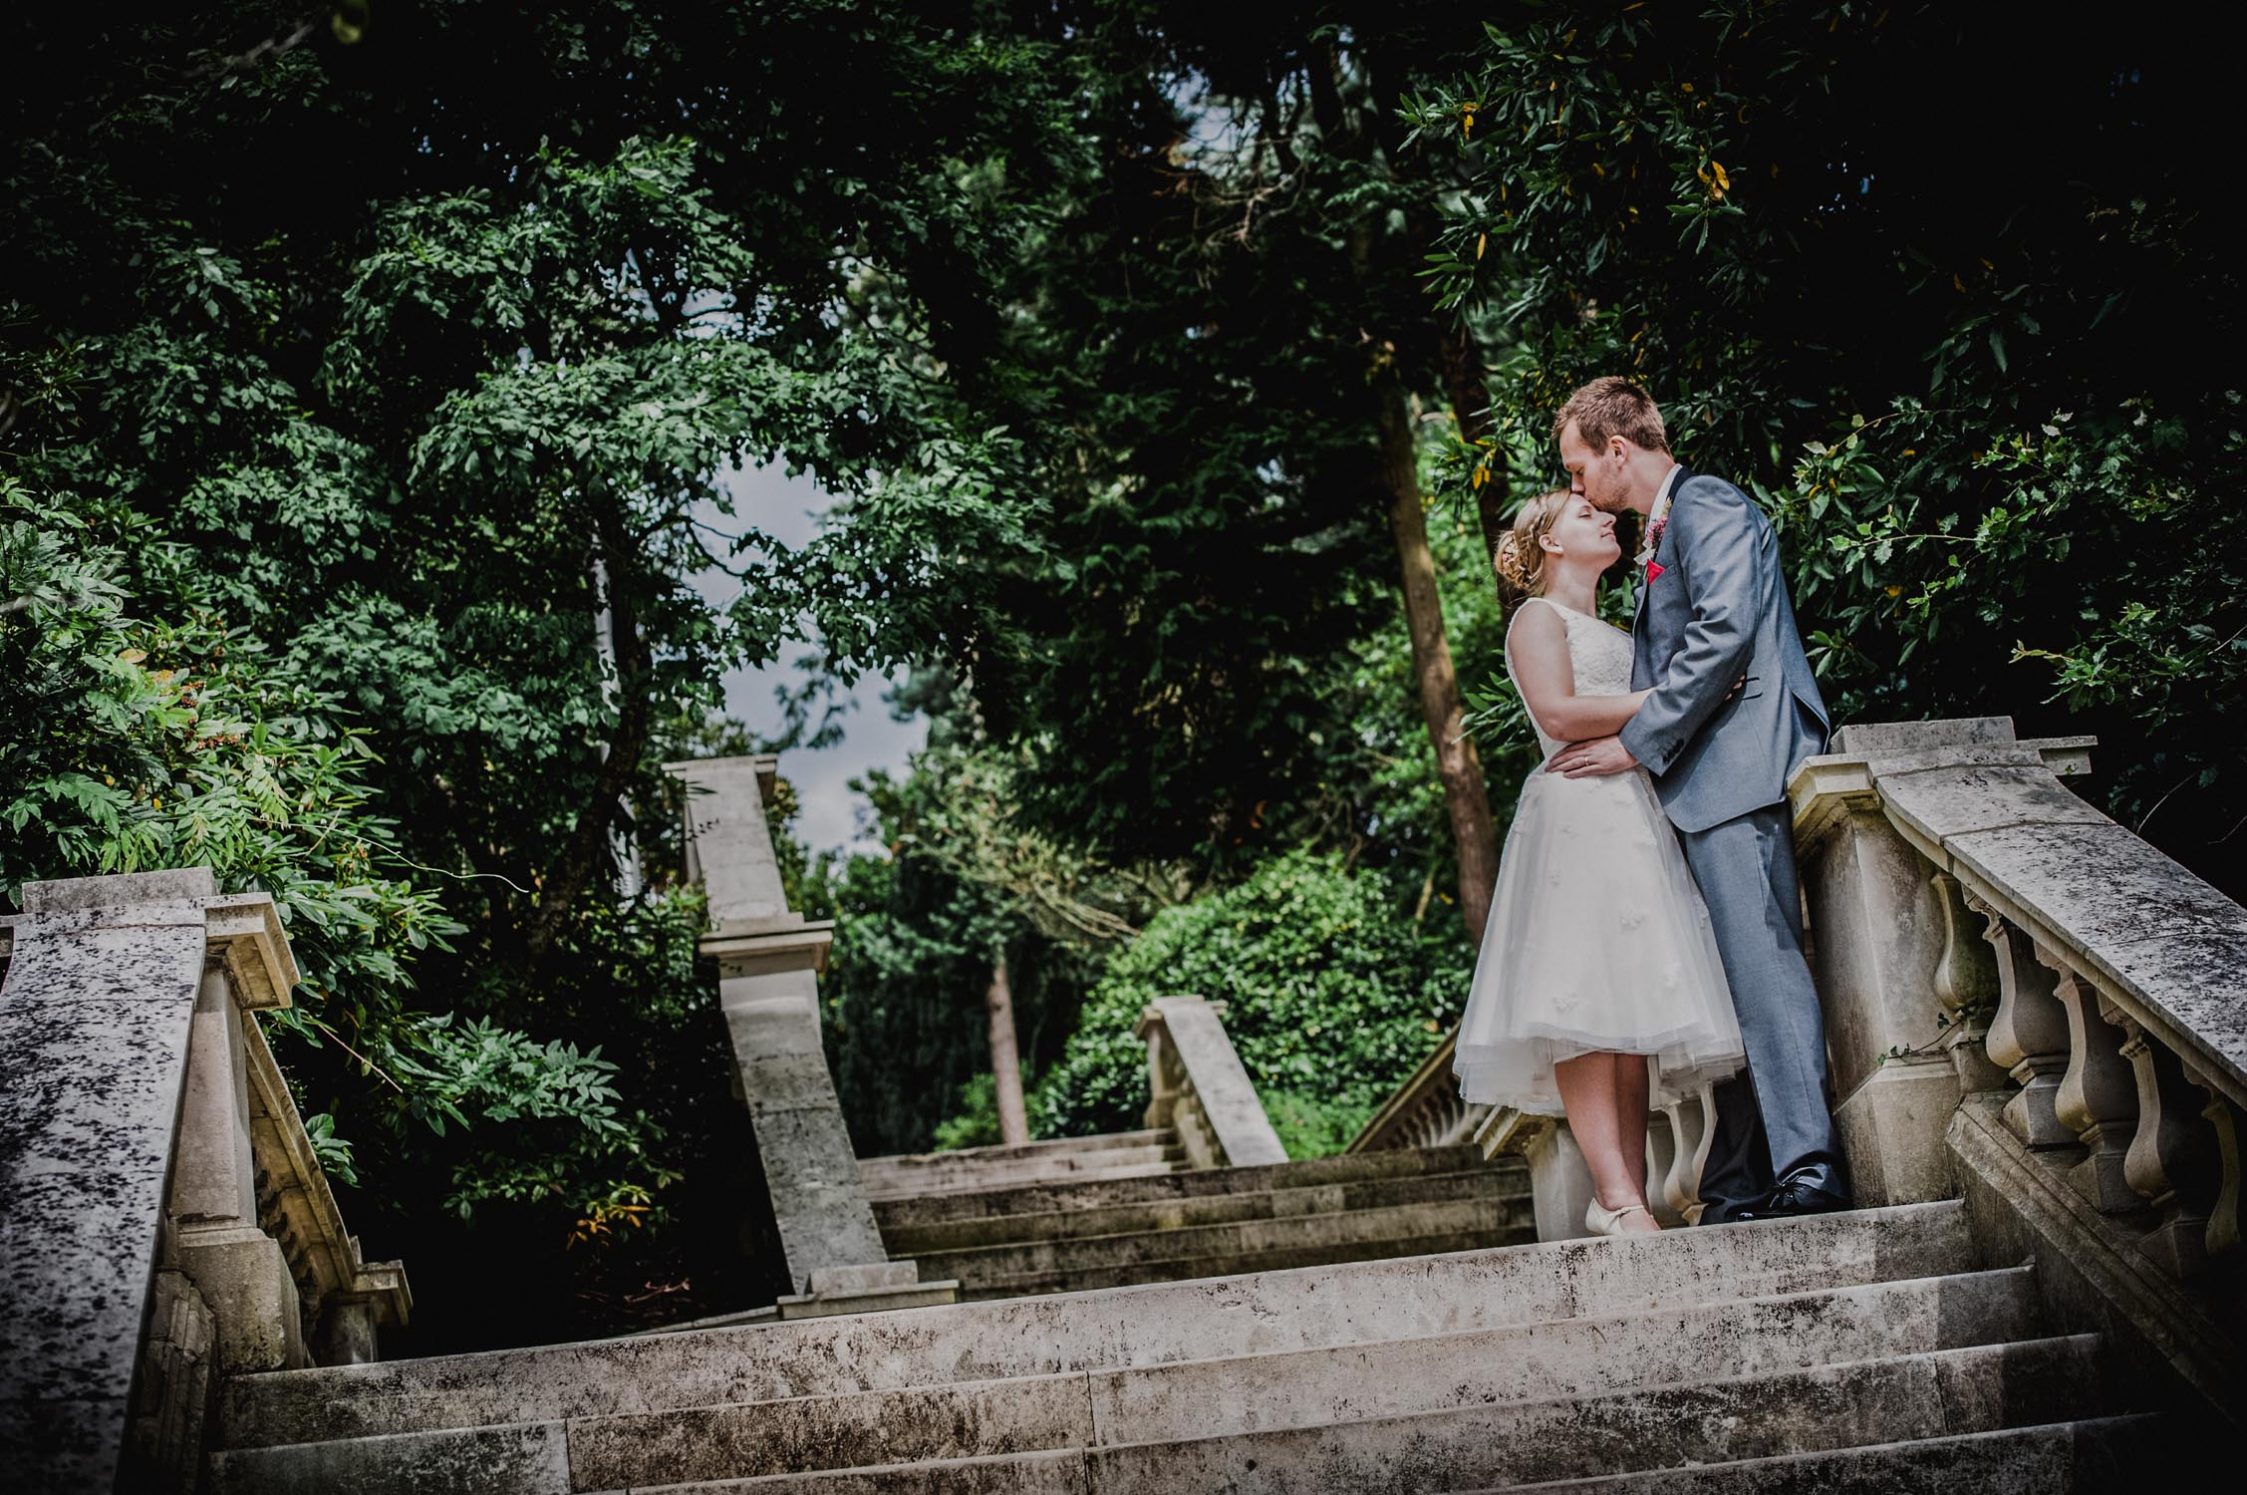 Reed hall wedding photographer in Exeter capturing intimate bride and groom images. Devon wedding photography